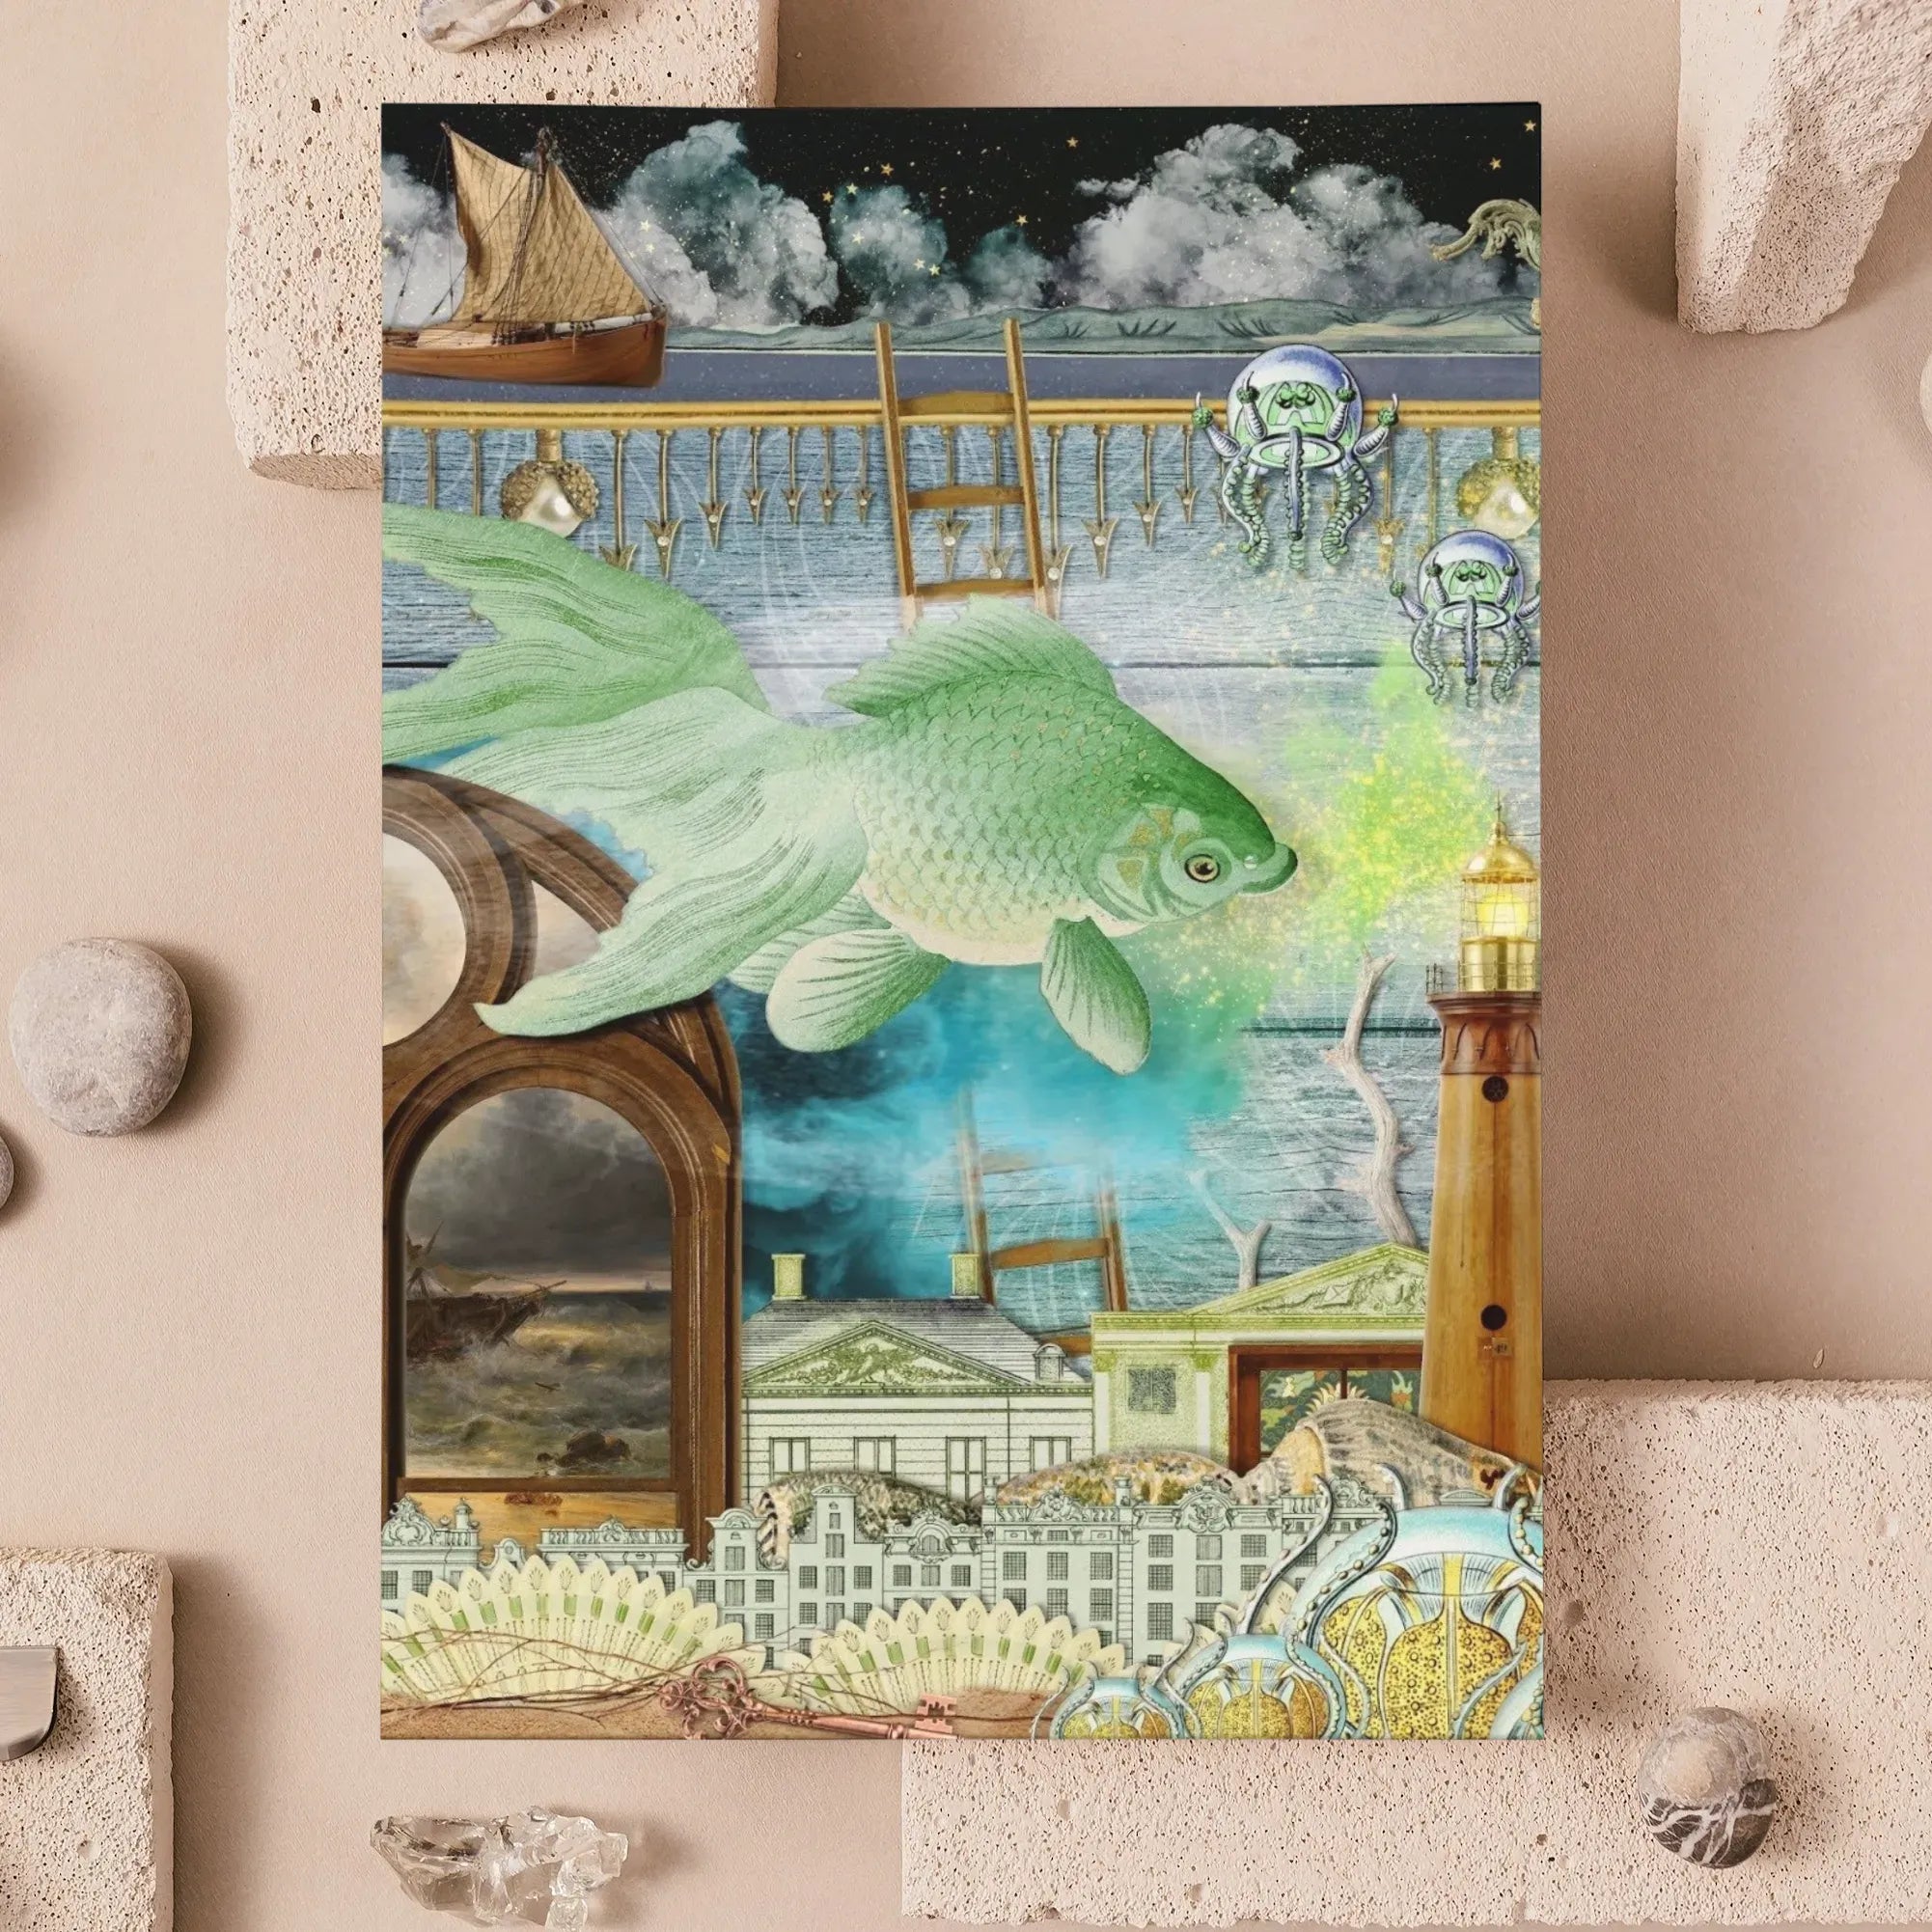 Down Where It’s Wetter Part 1 Greeting Card - Greeting & Note Cards - Aesthetic Art